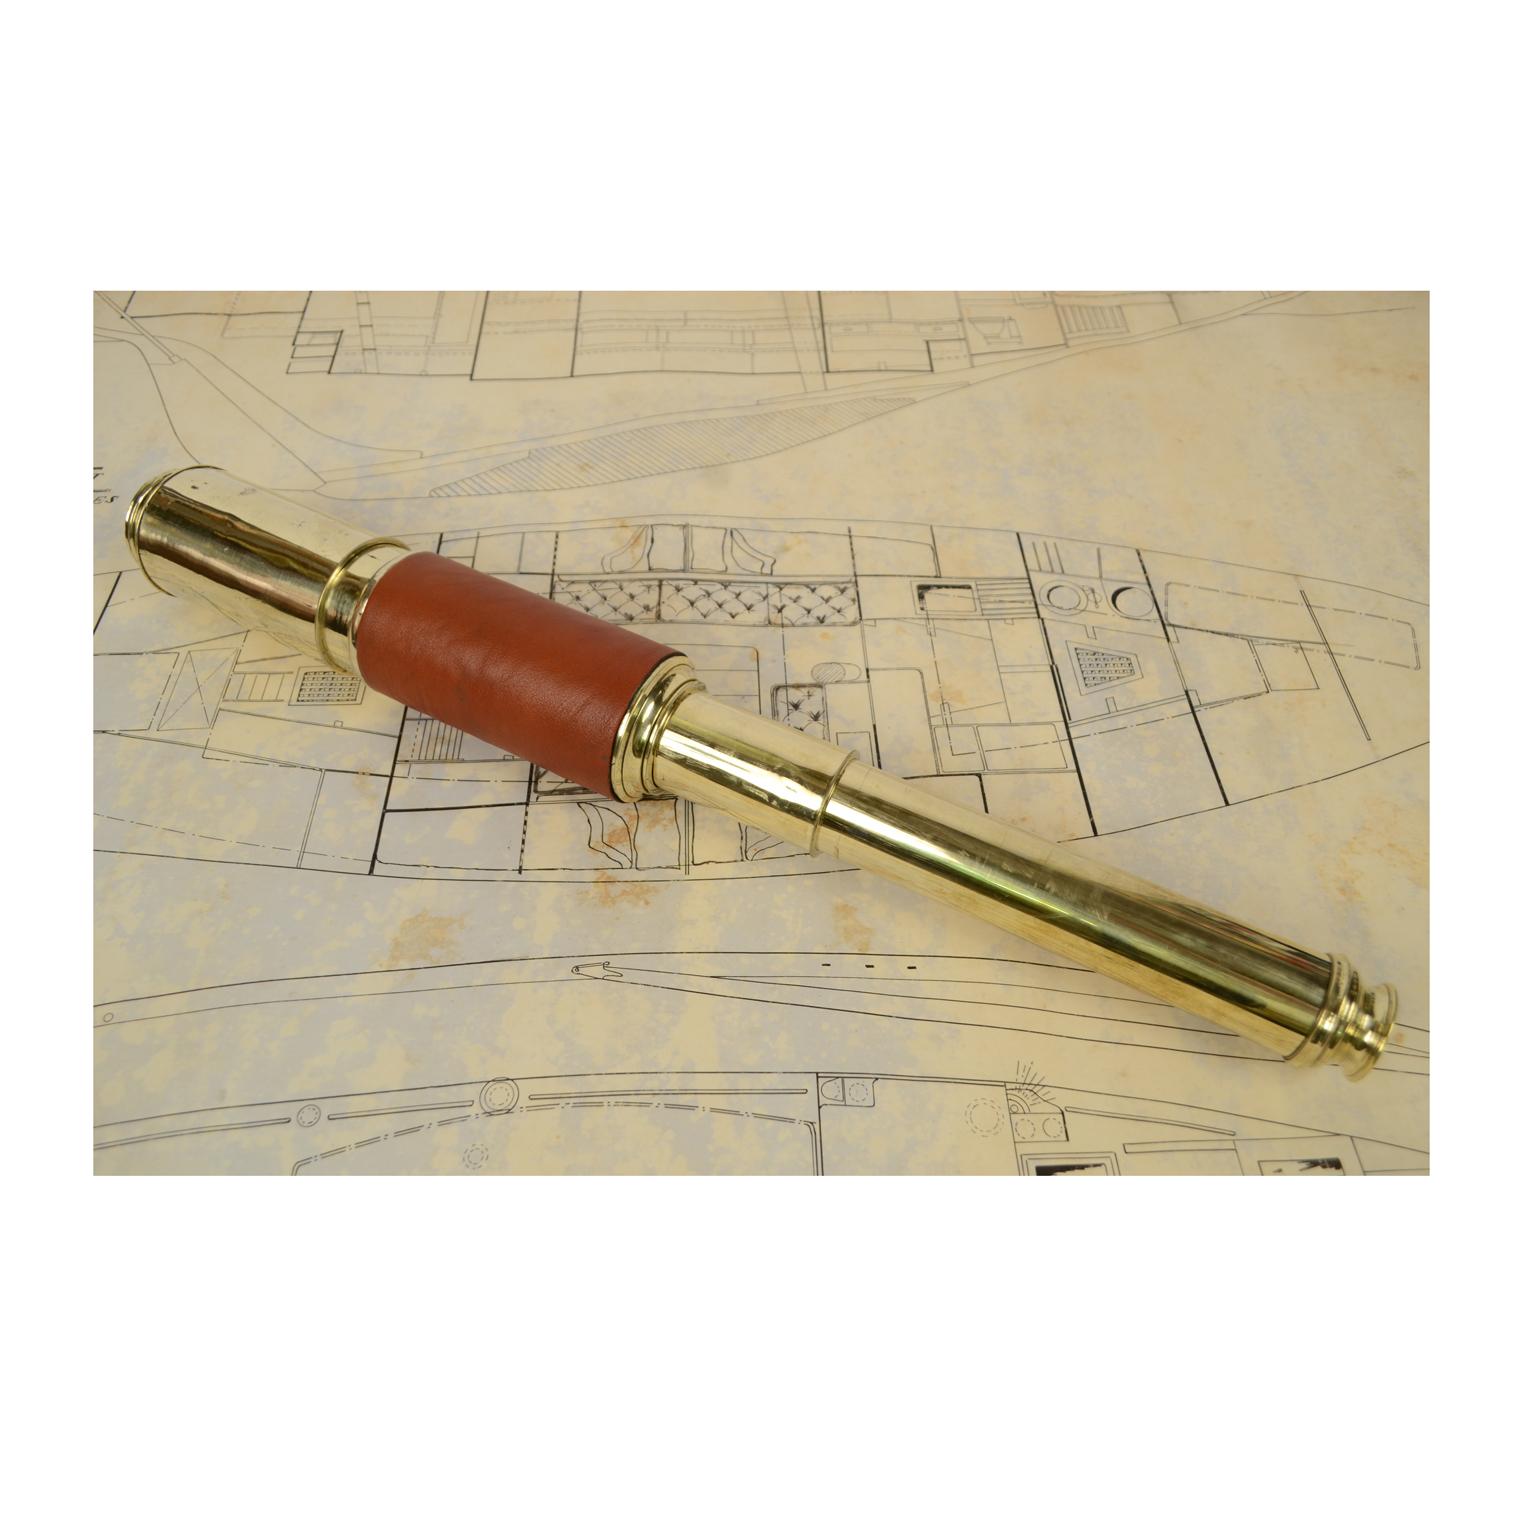 Brass and leather telescope signed P. Carpenter London Improved Day or Night in the mid-19th century. Focusing with three extensions, complete with sunshade extension. Maximum length 91.5 cm, minimum 28 cm, focal diameter 4.5 cm. Very good working